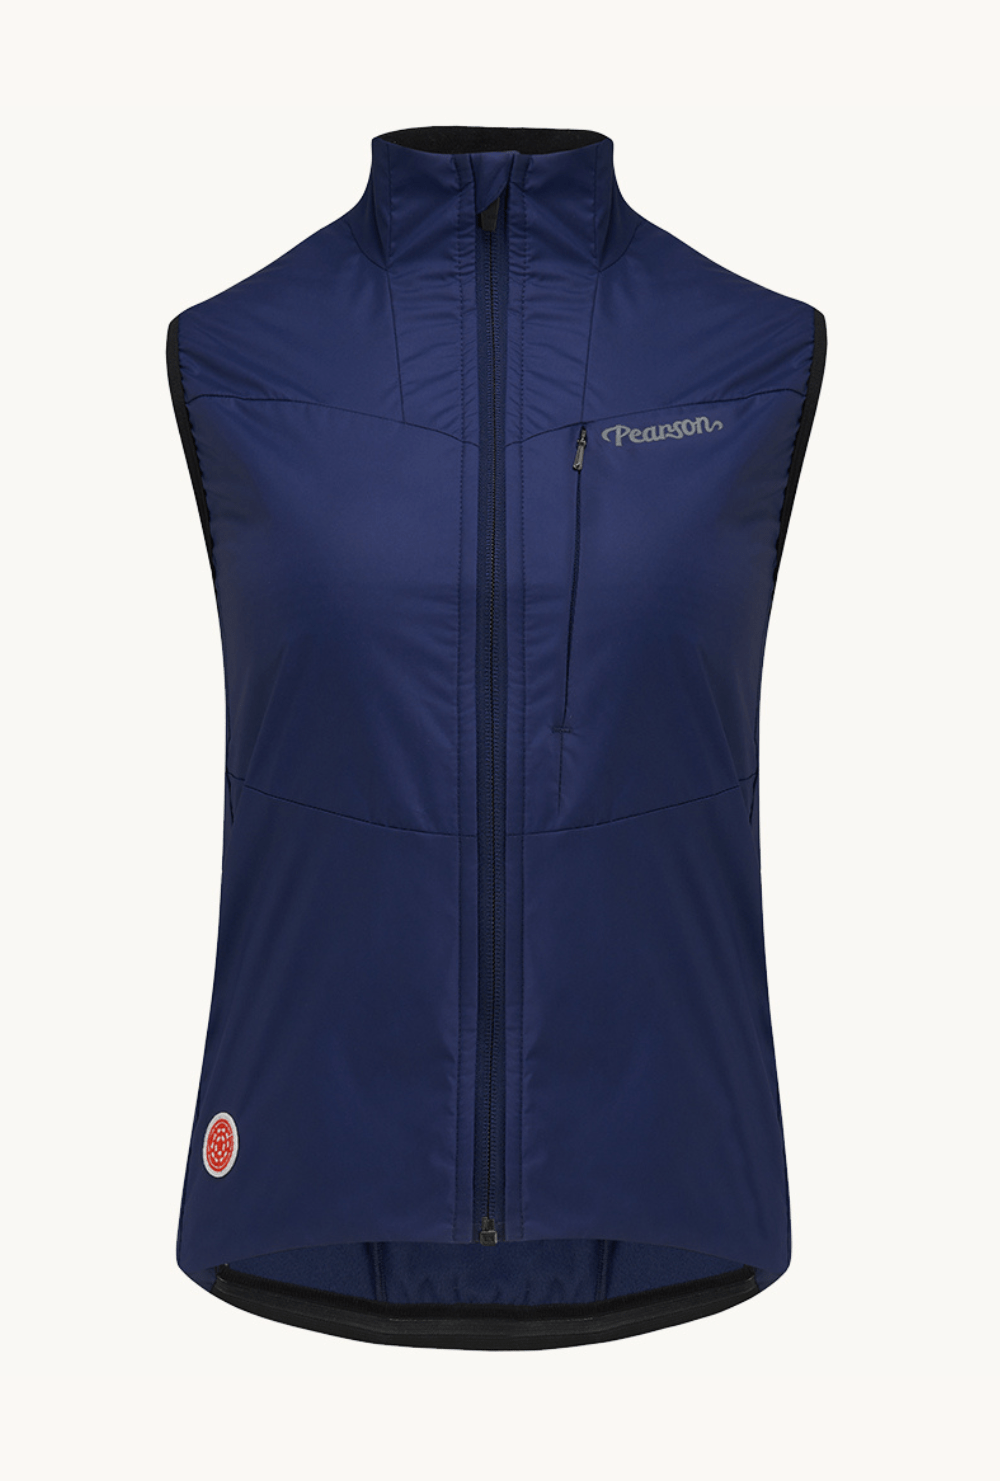 Pearson 1860  Feel The Benefits - Womens Road Insulated Gilet Blue Ink  X-small / Blue Ink